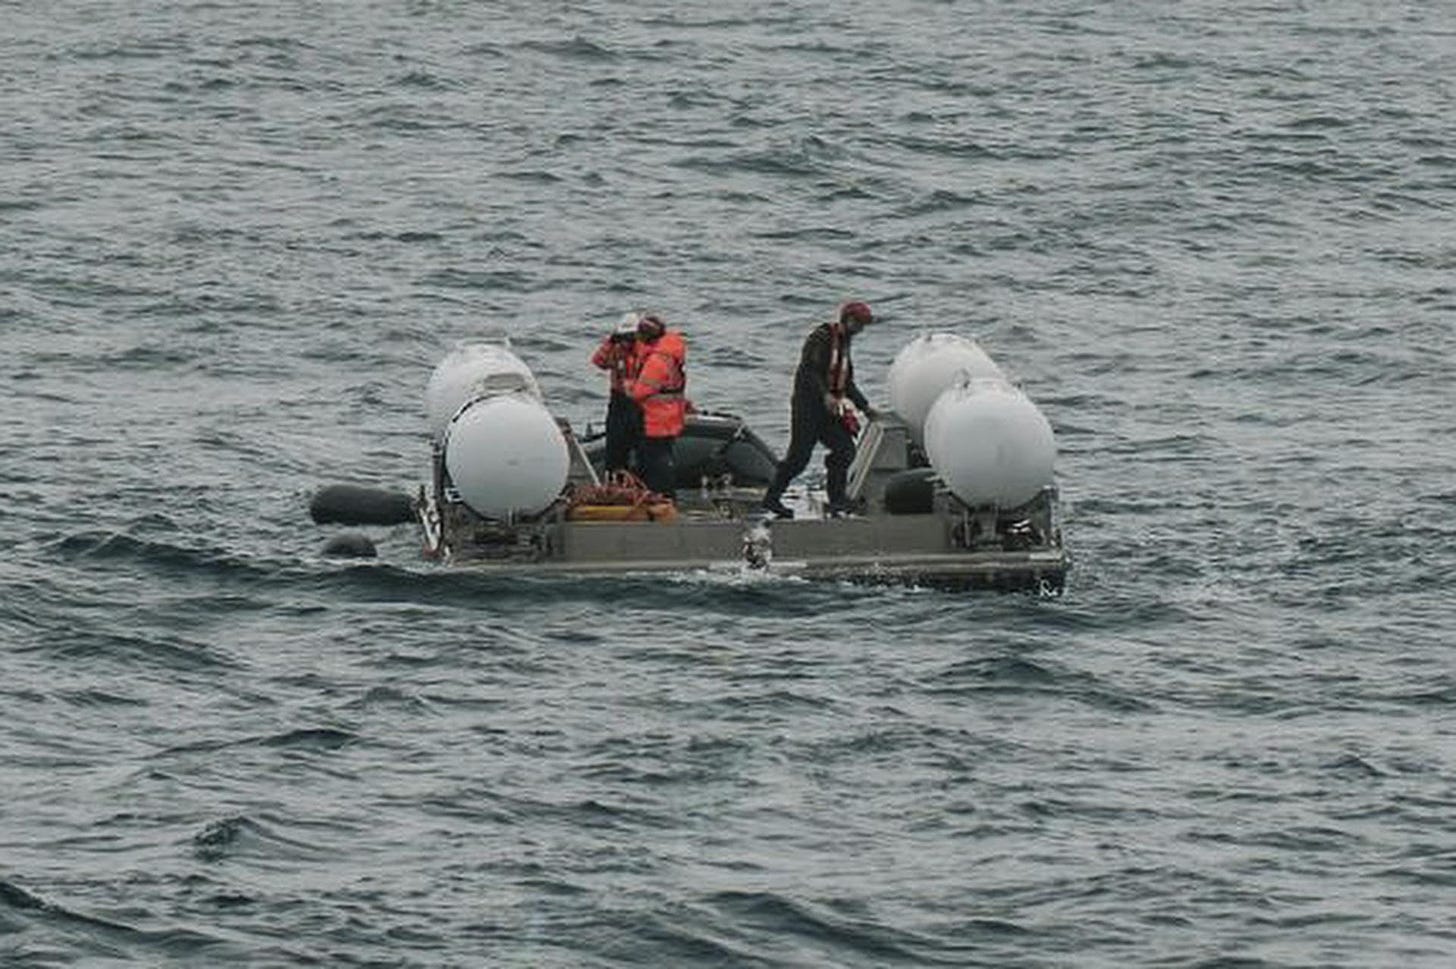 The submersible Titan being prepared an expedition